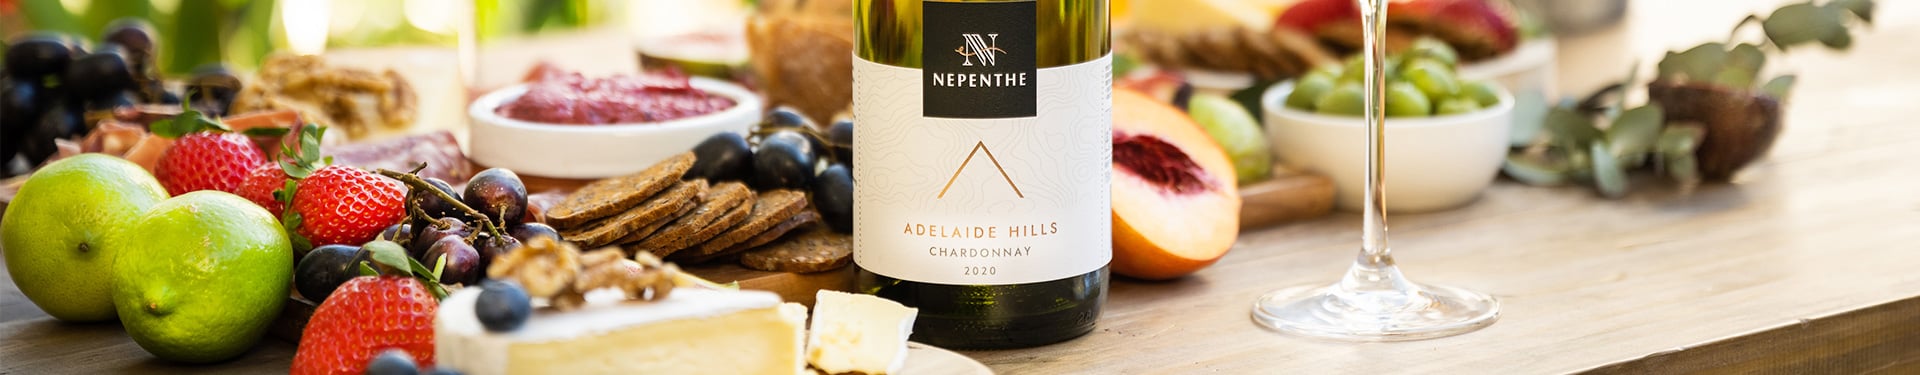 Bottle of Nepenthe Elevation 2020 Chardonnay surrounded by a charcuterie board containing fruit, meat and cheese